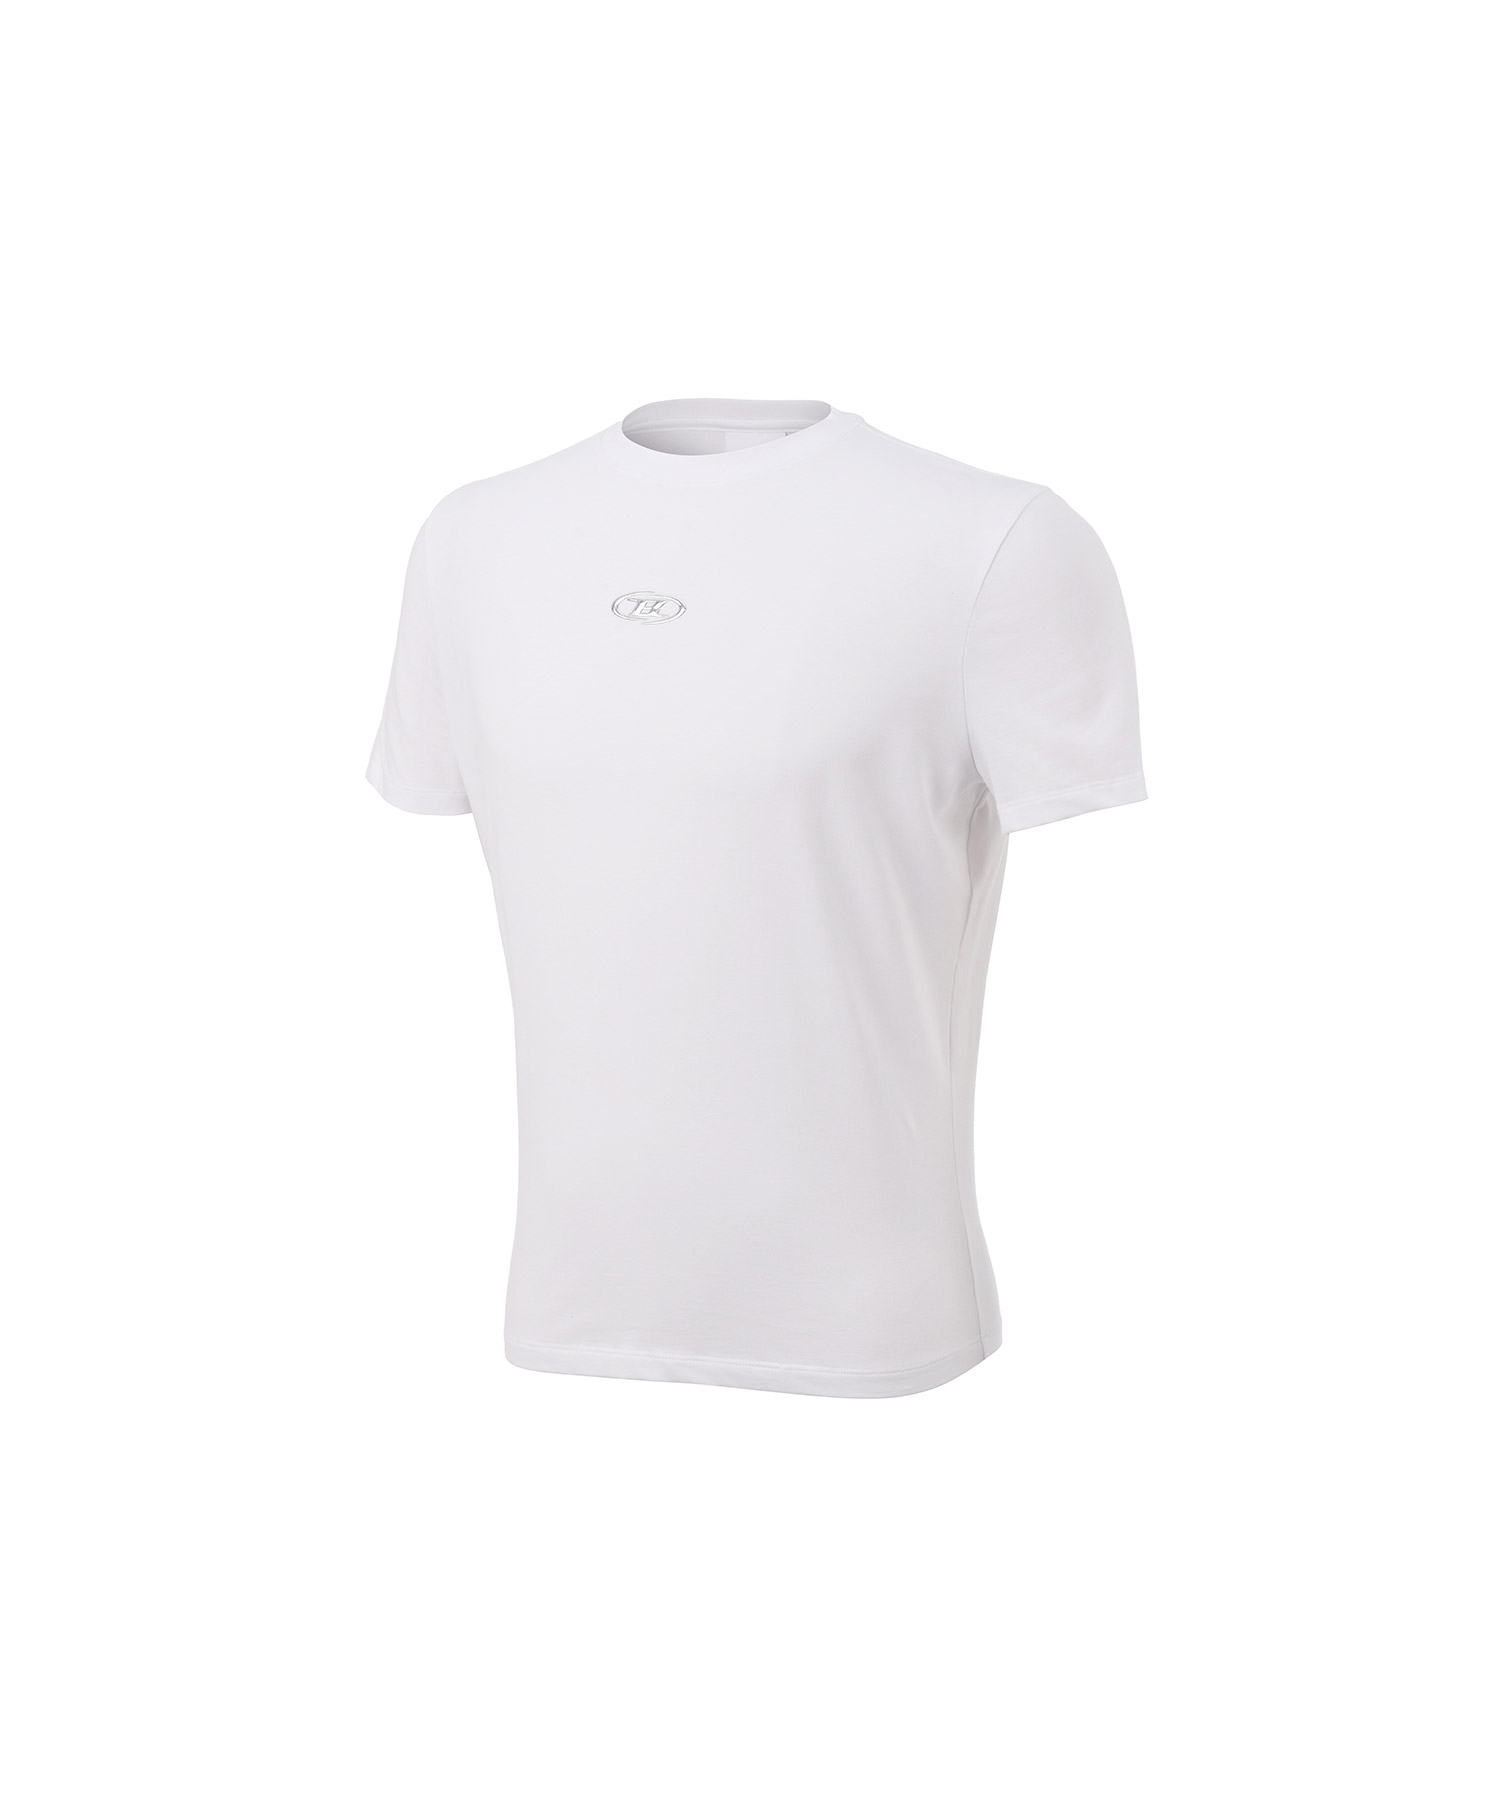 SILVER B LOGO MUSCLE FIT T-SHIRTS [WHITE]